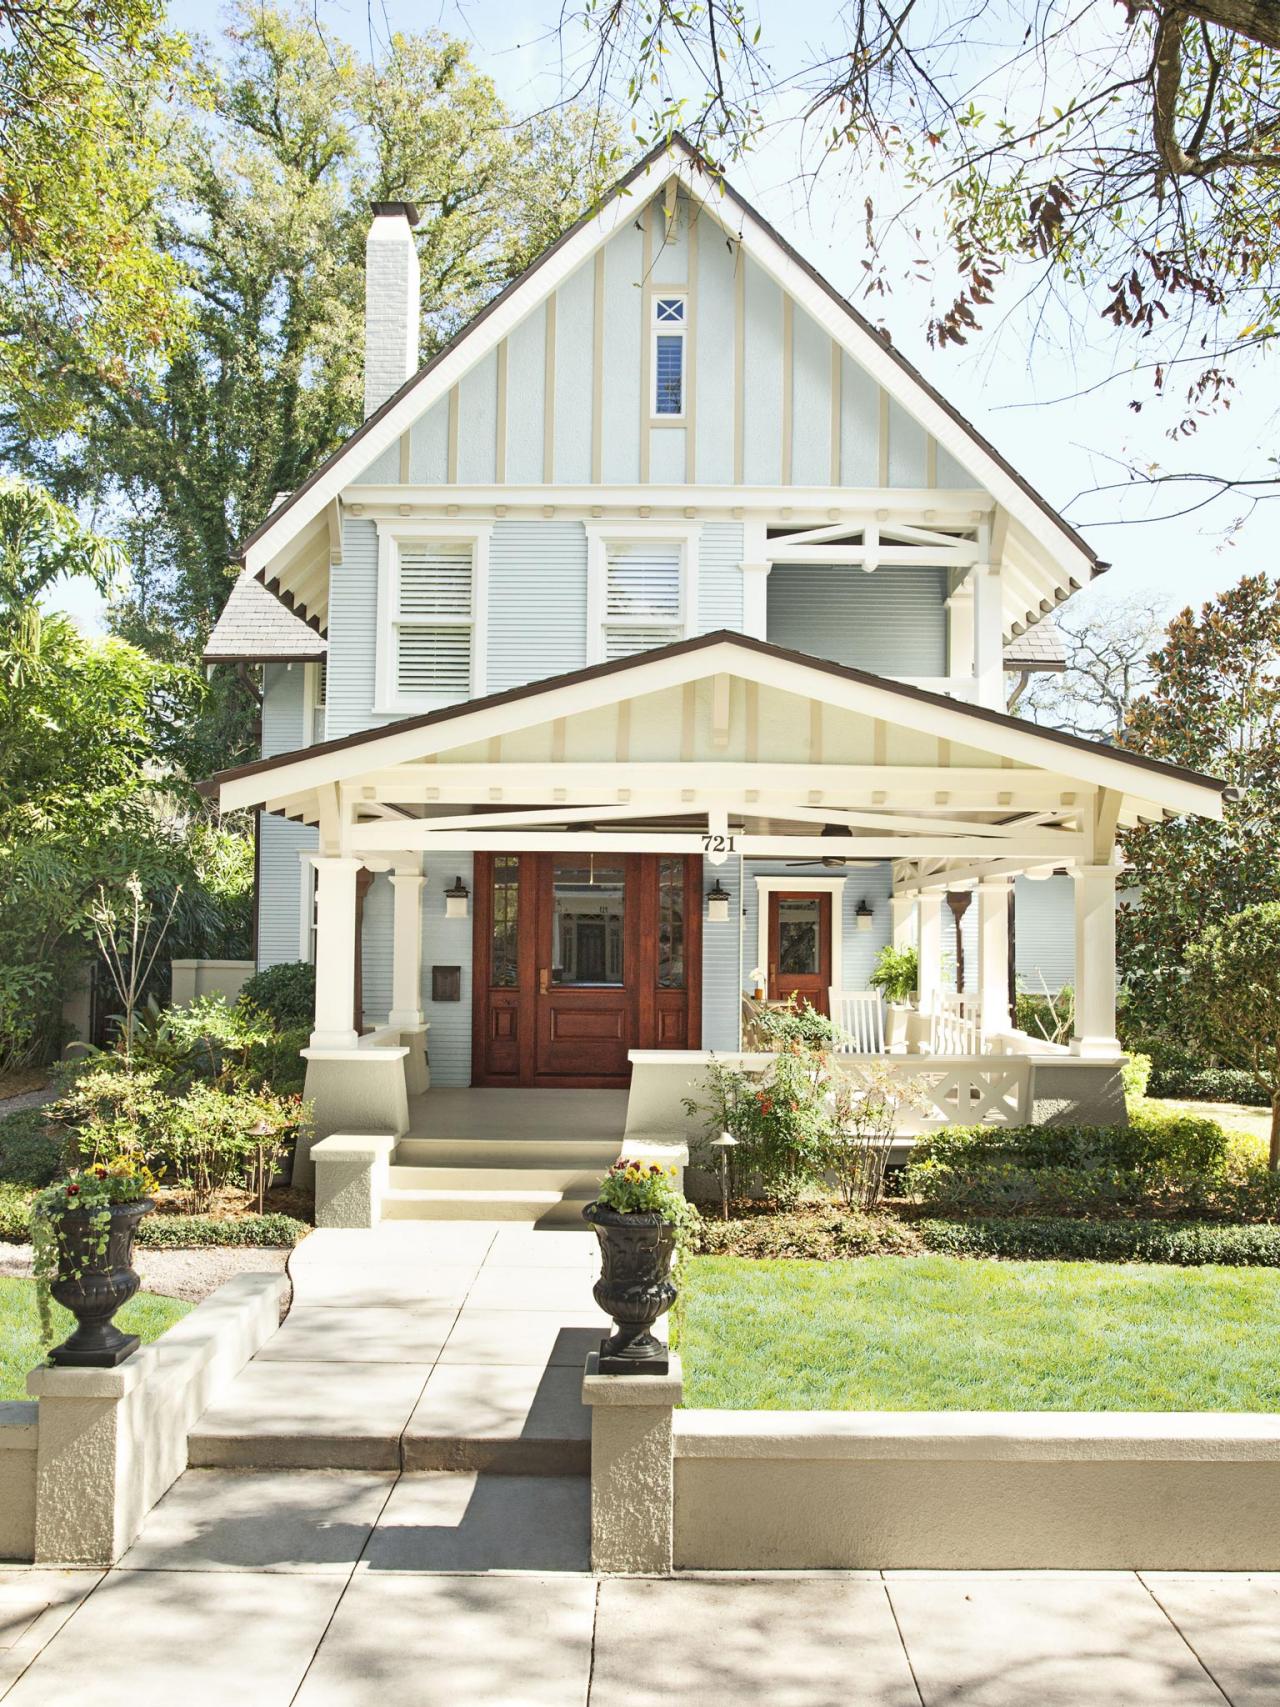 The Porch Appeal: Crafting Welcoming Exteriors For Cottage Homes